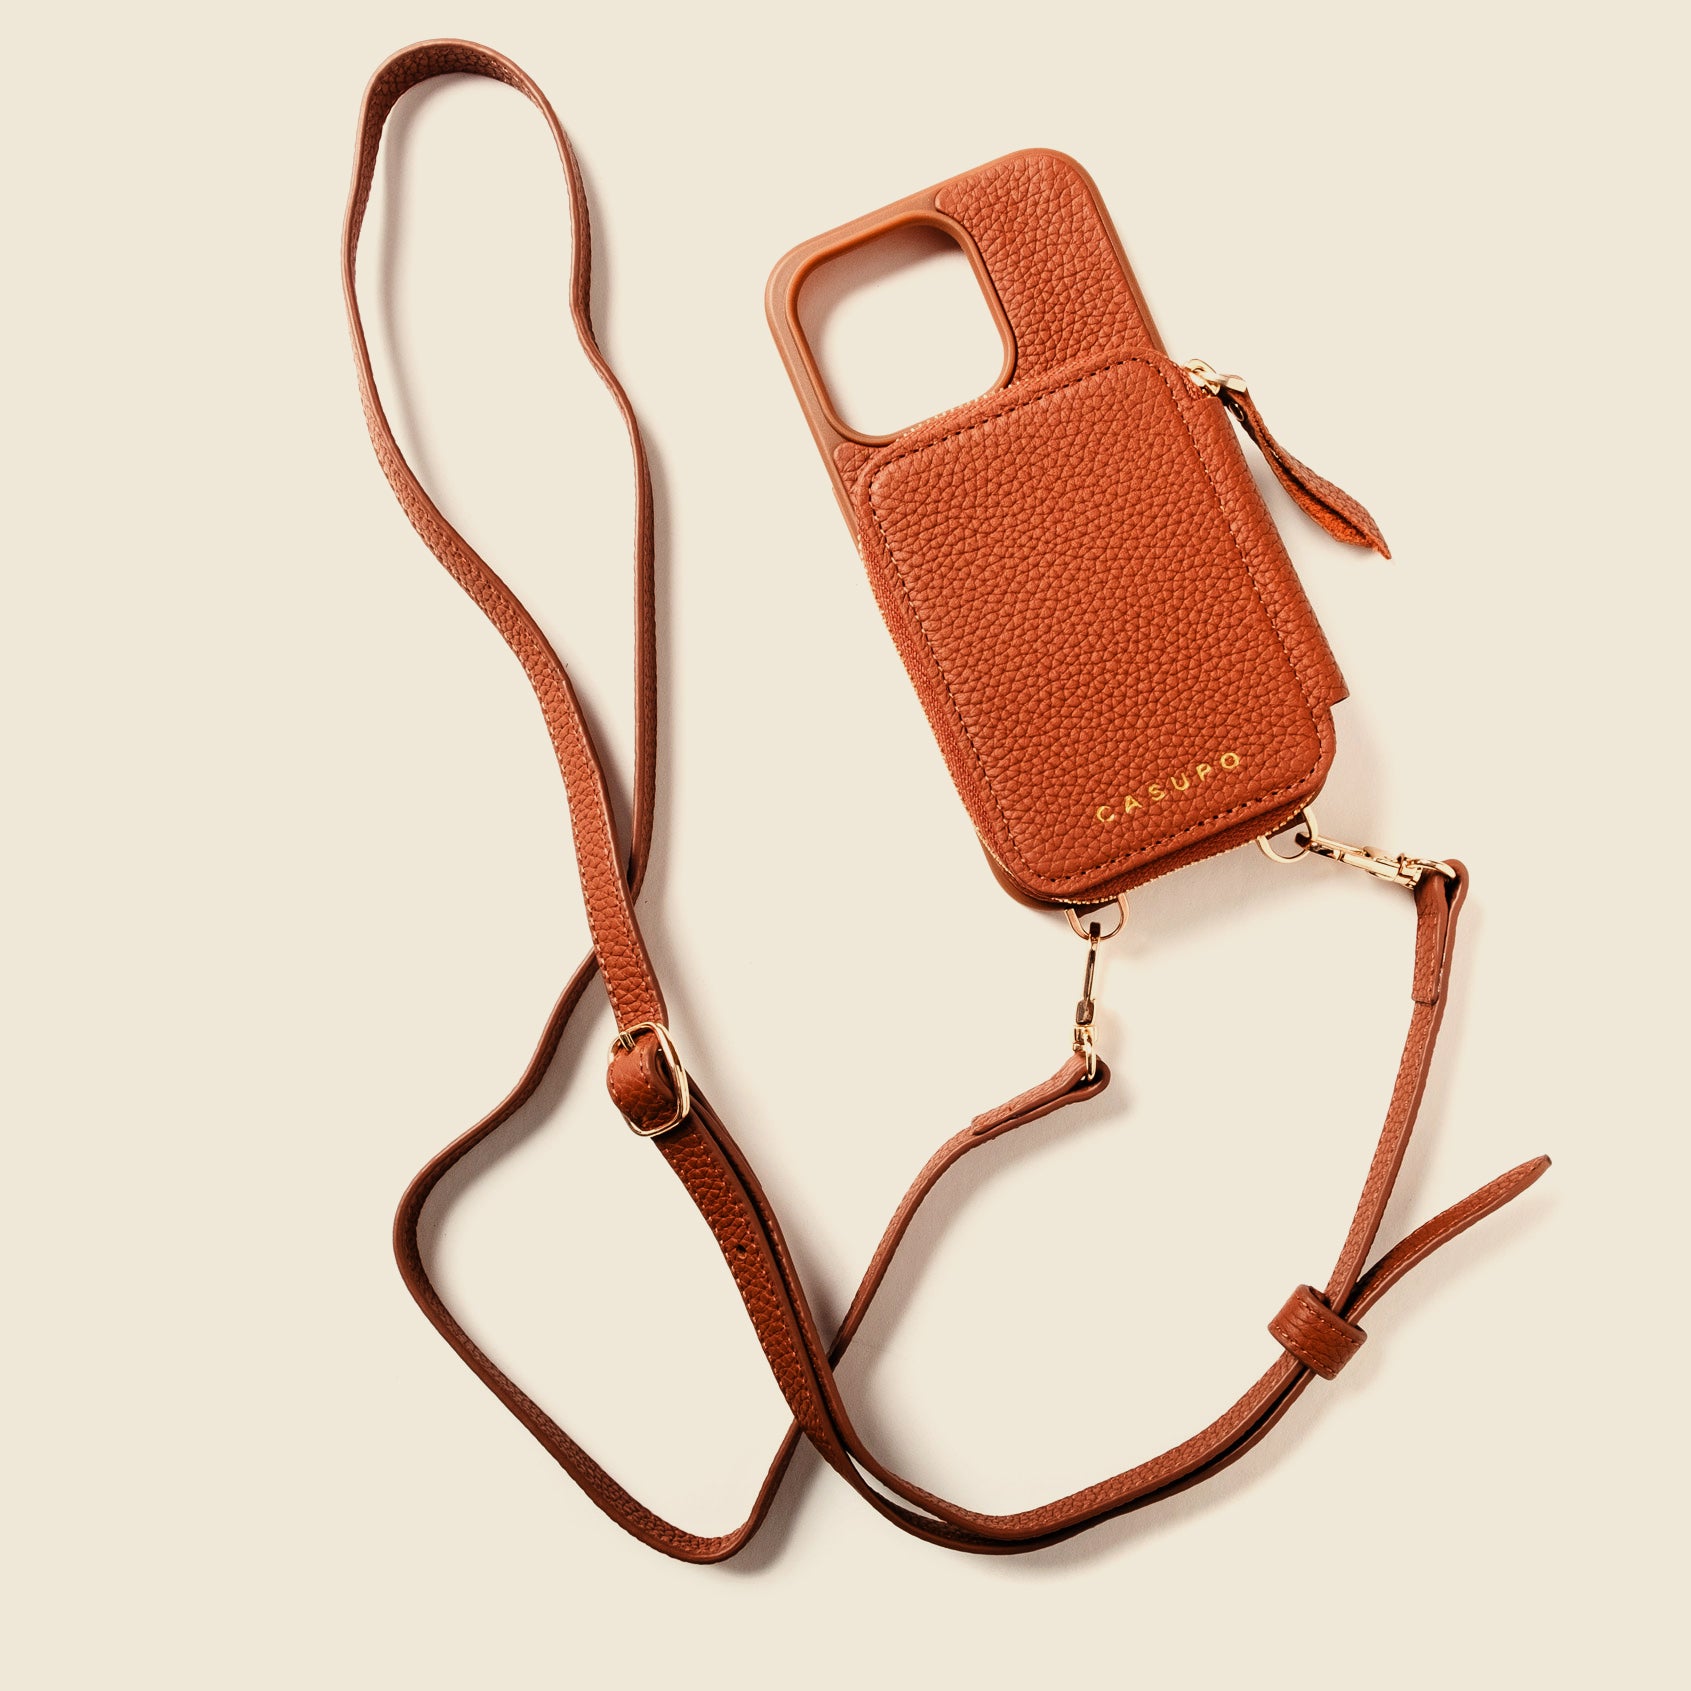 Brown leather iphone bag bandolier wallet